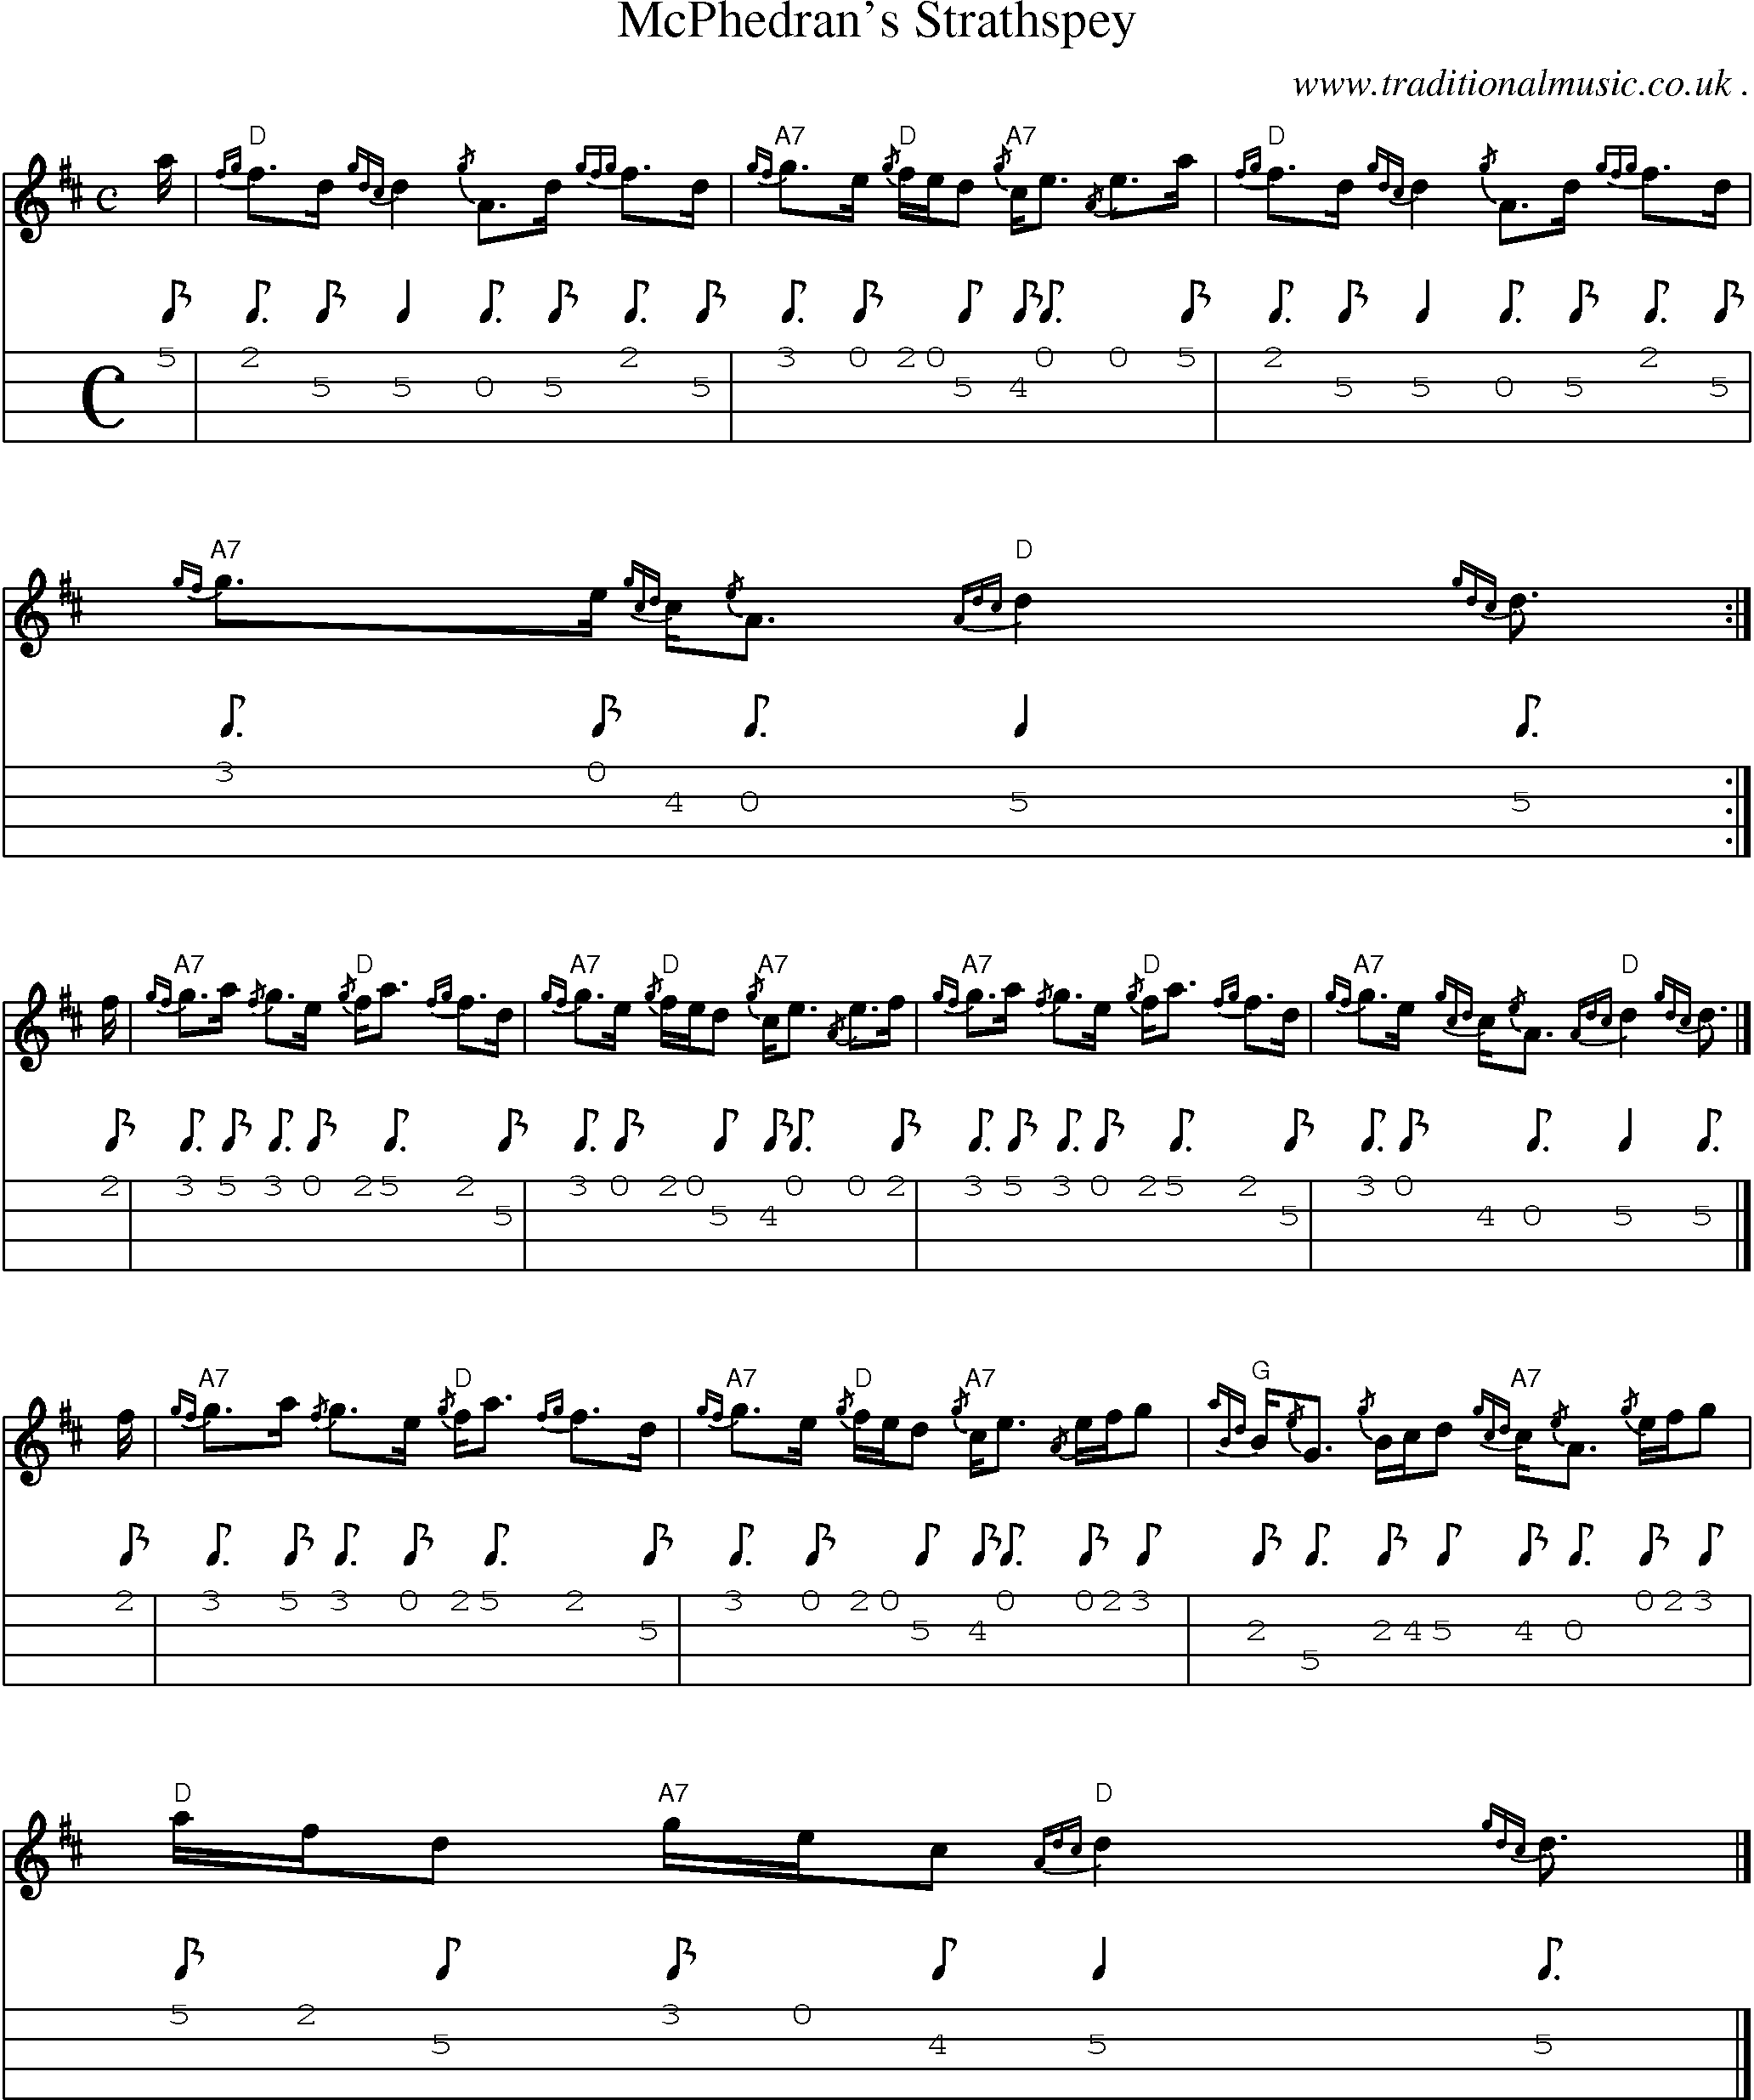 Sheet-music  score, Chords and Mandolin Tabs for Mcphedrans Strathspey